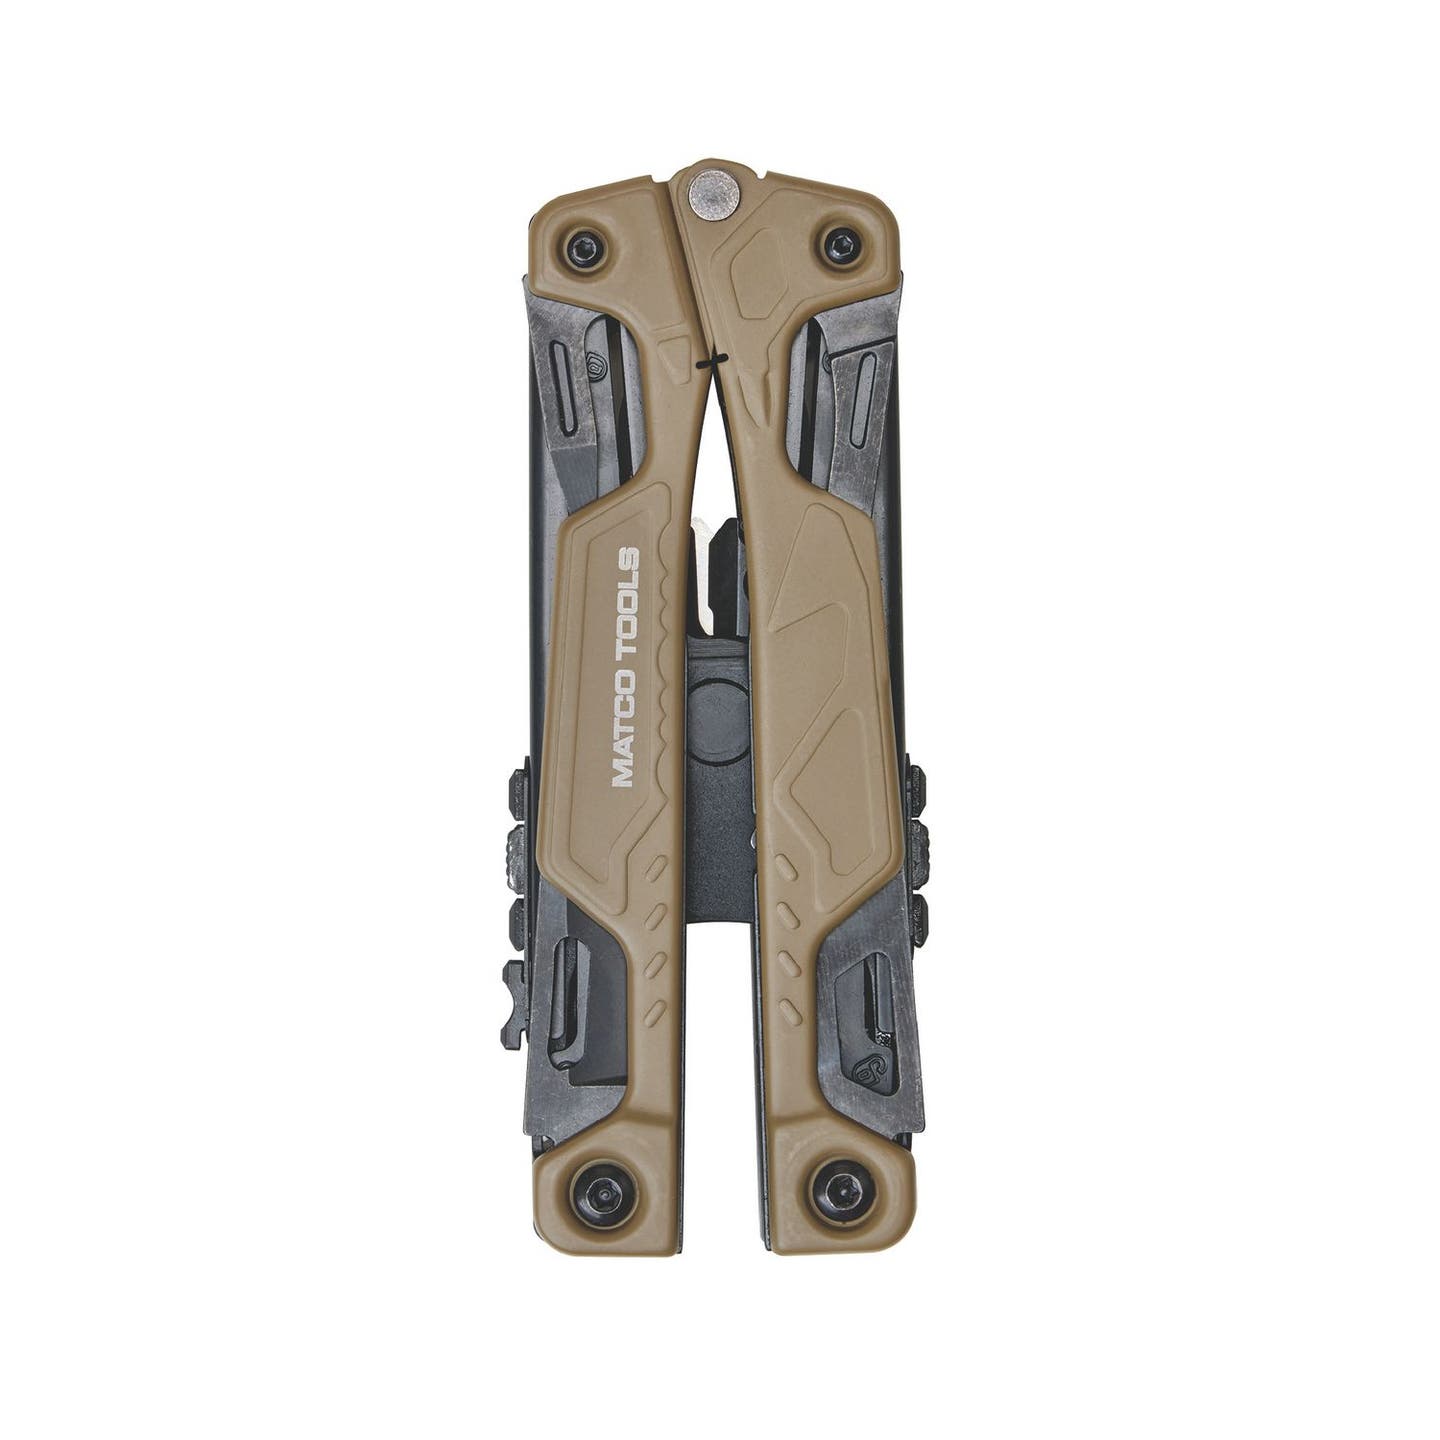 OHT 16-IN-1 MULTITOOL WITH MATCO TOOLS LOGO - COYOTE